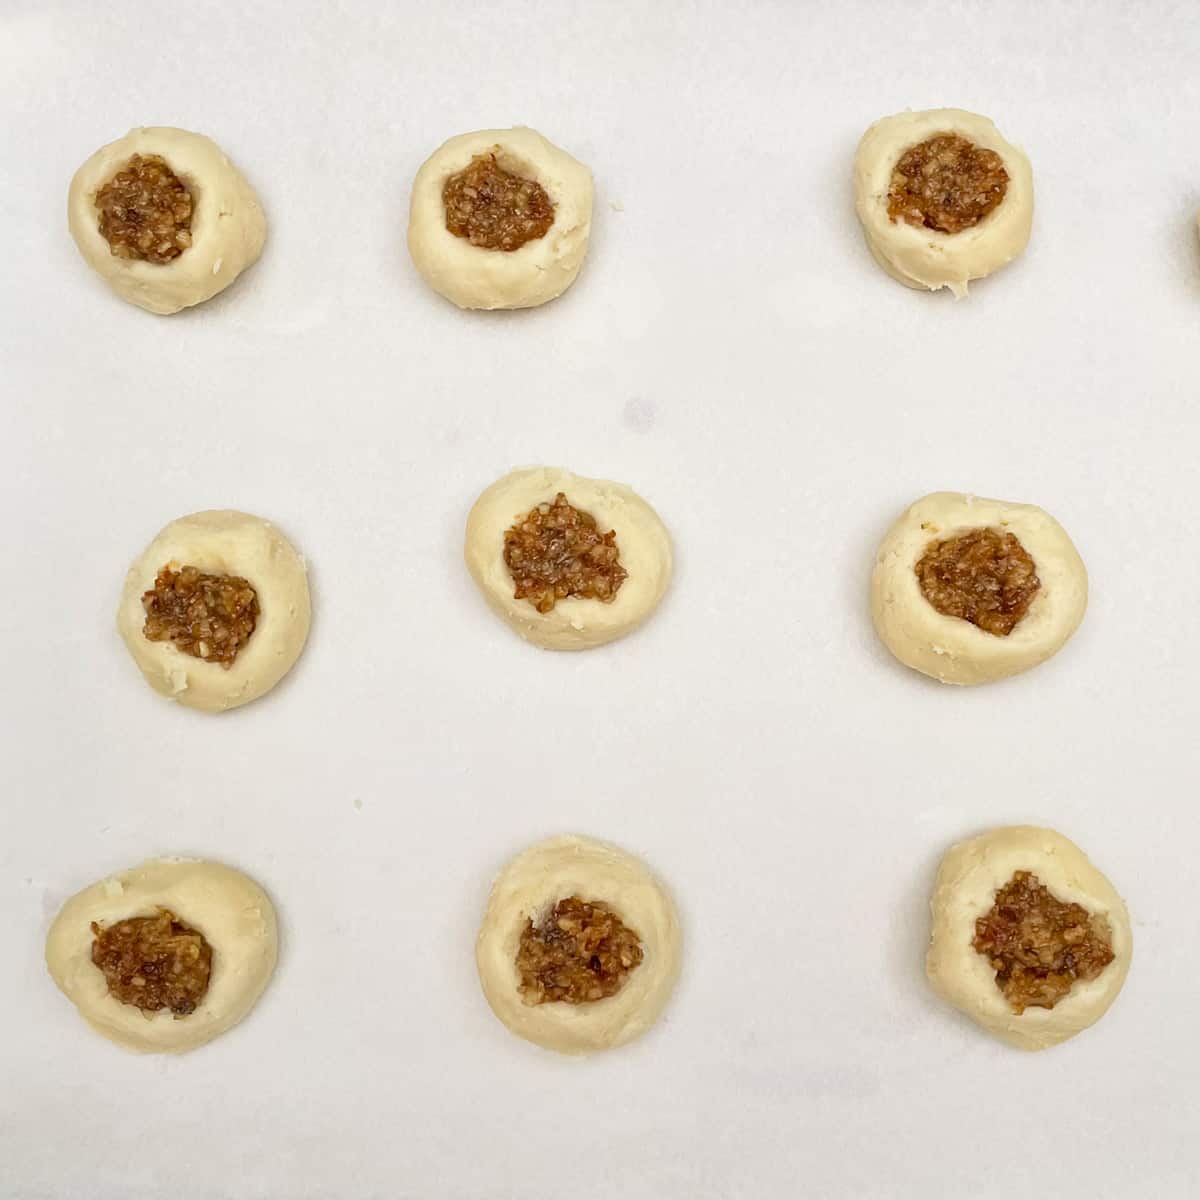 Nine round cookies with walnut date filling in the middle on parchment paper before they are baked.